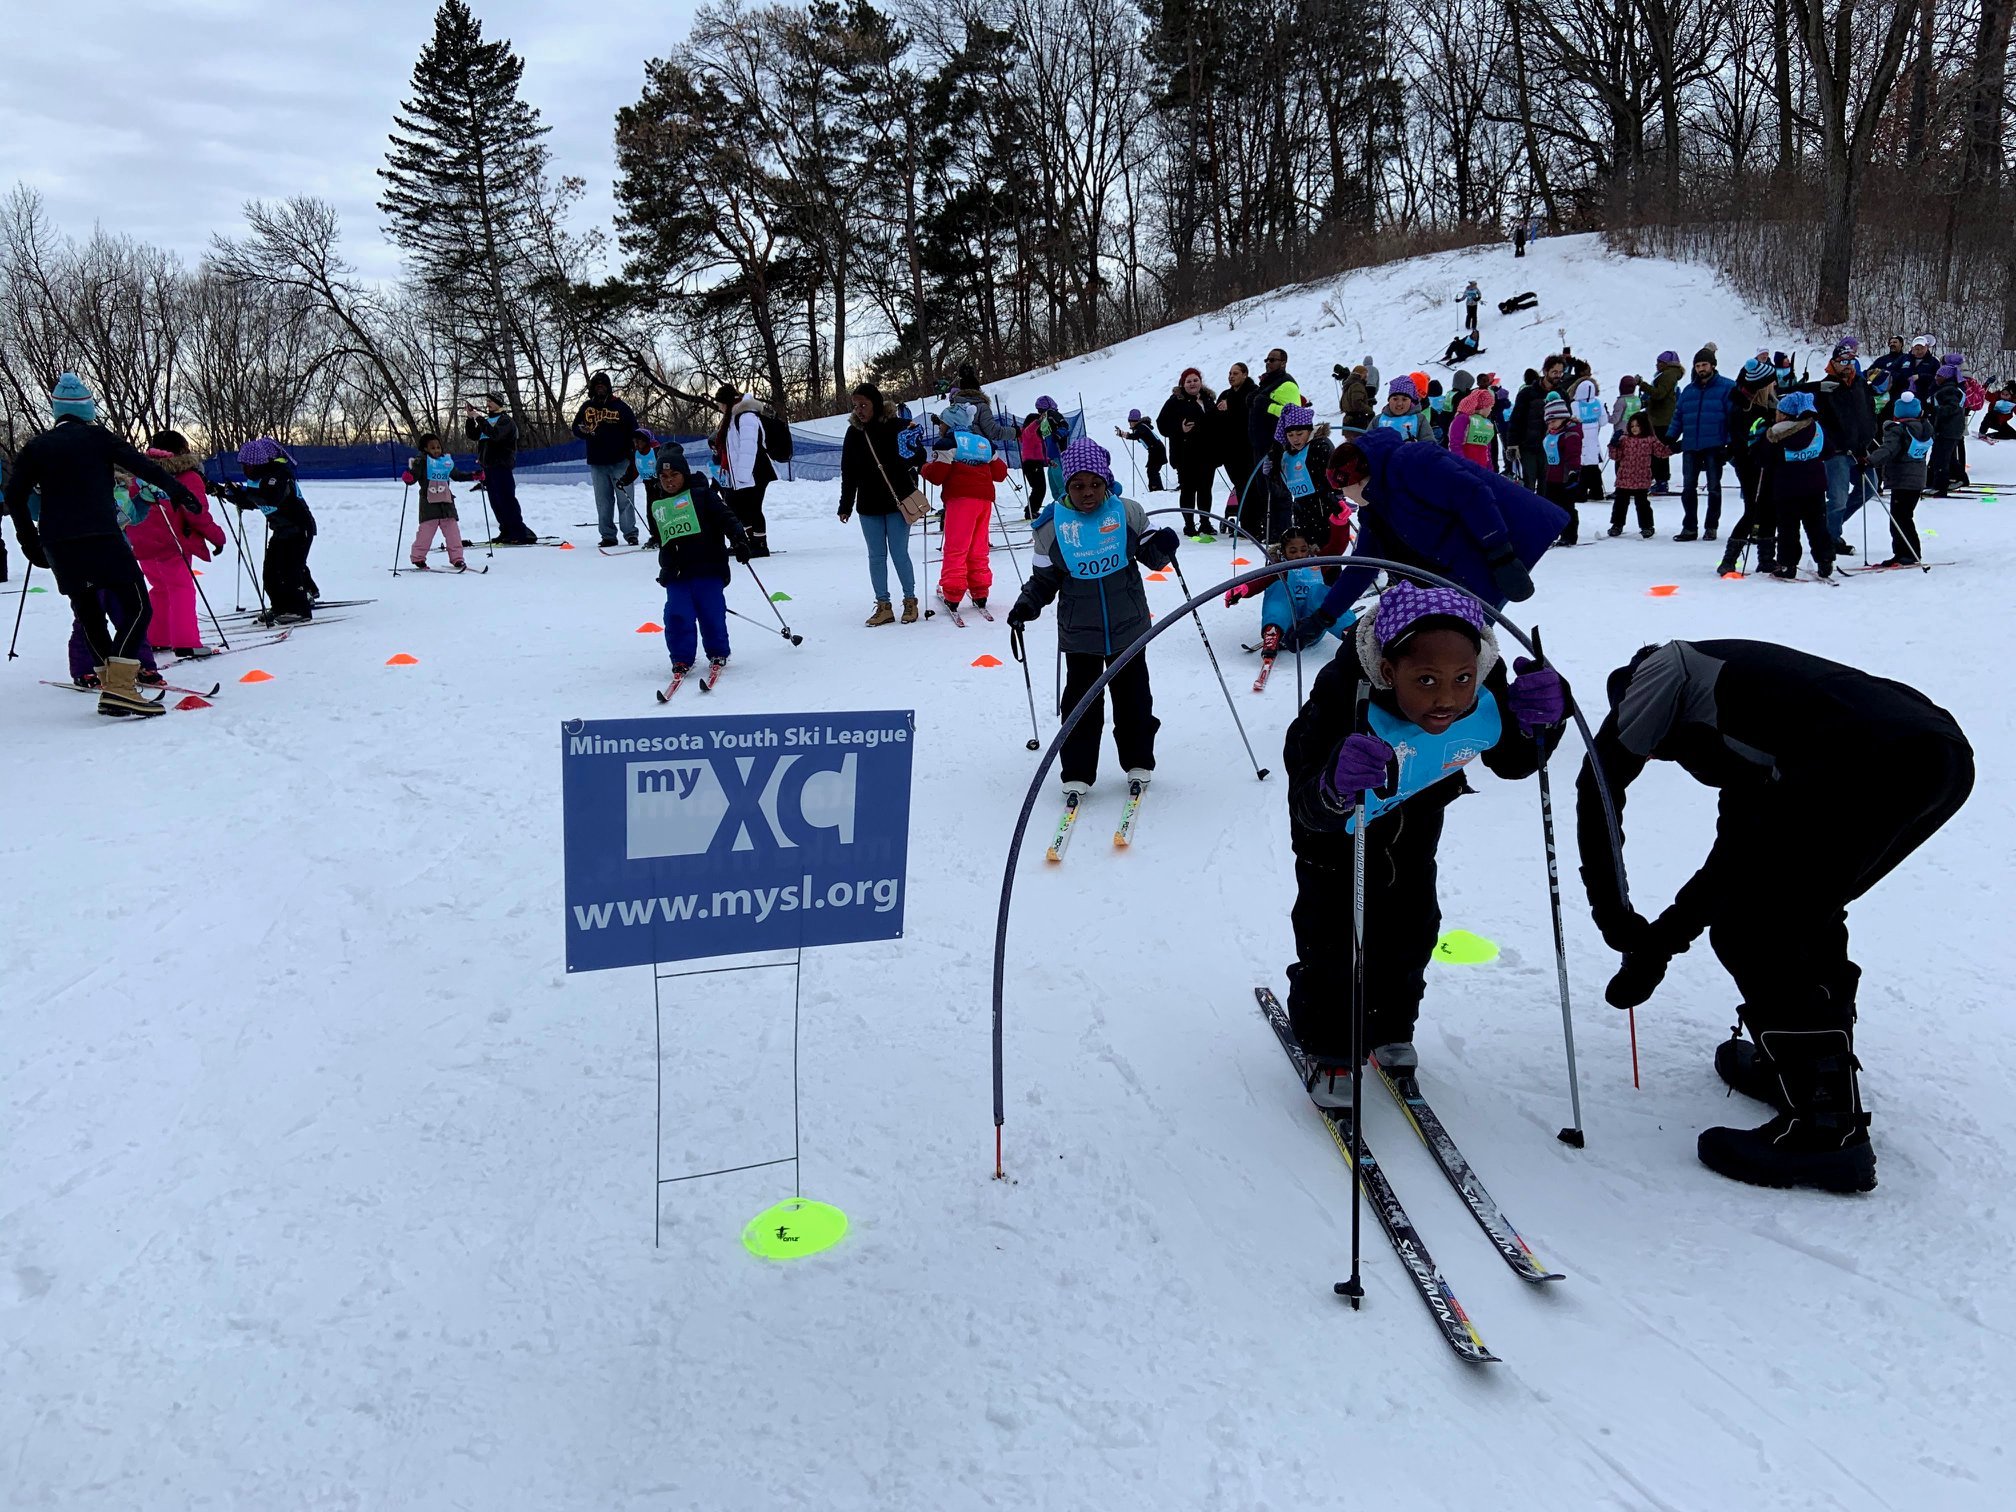 Nordic skiing is growing fast in the United States